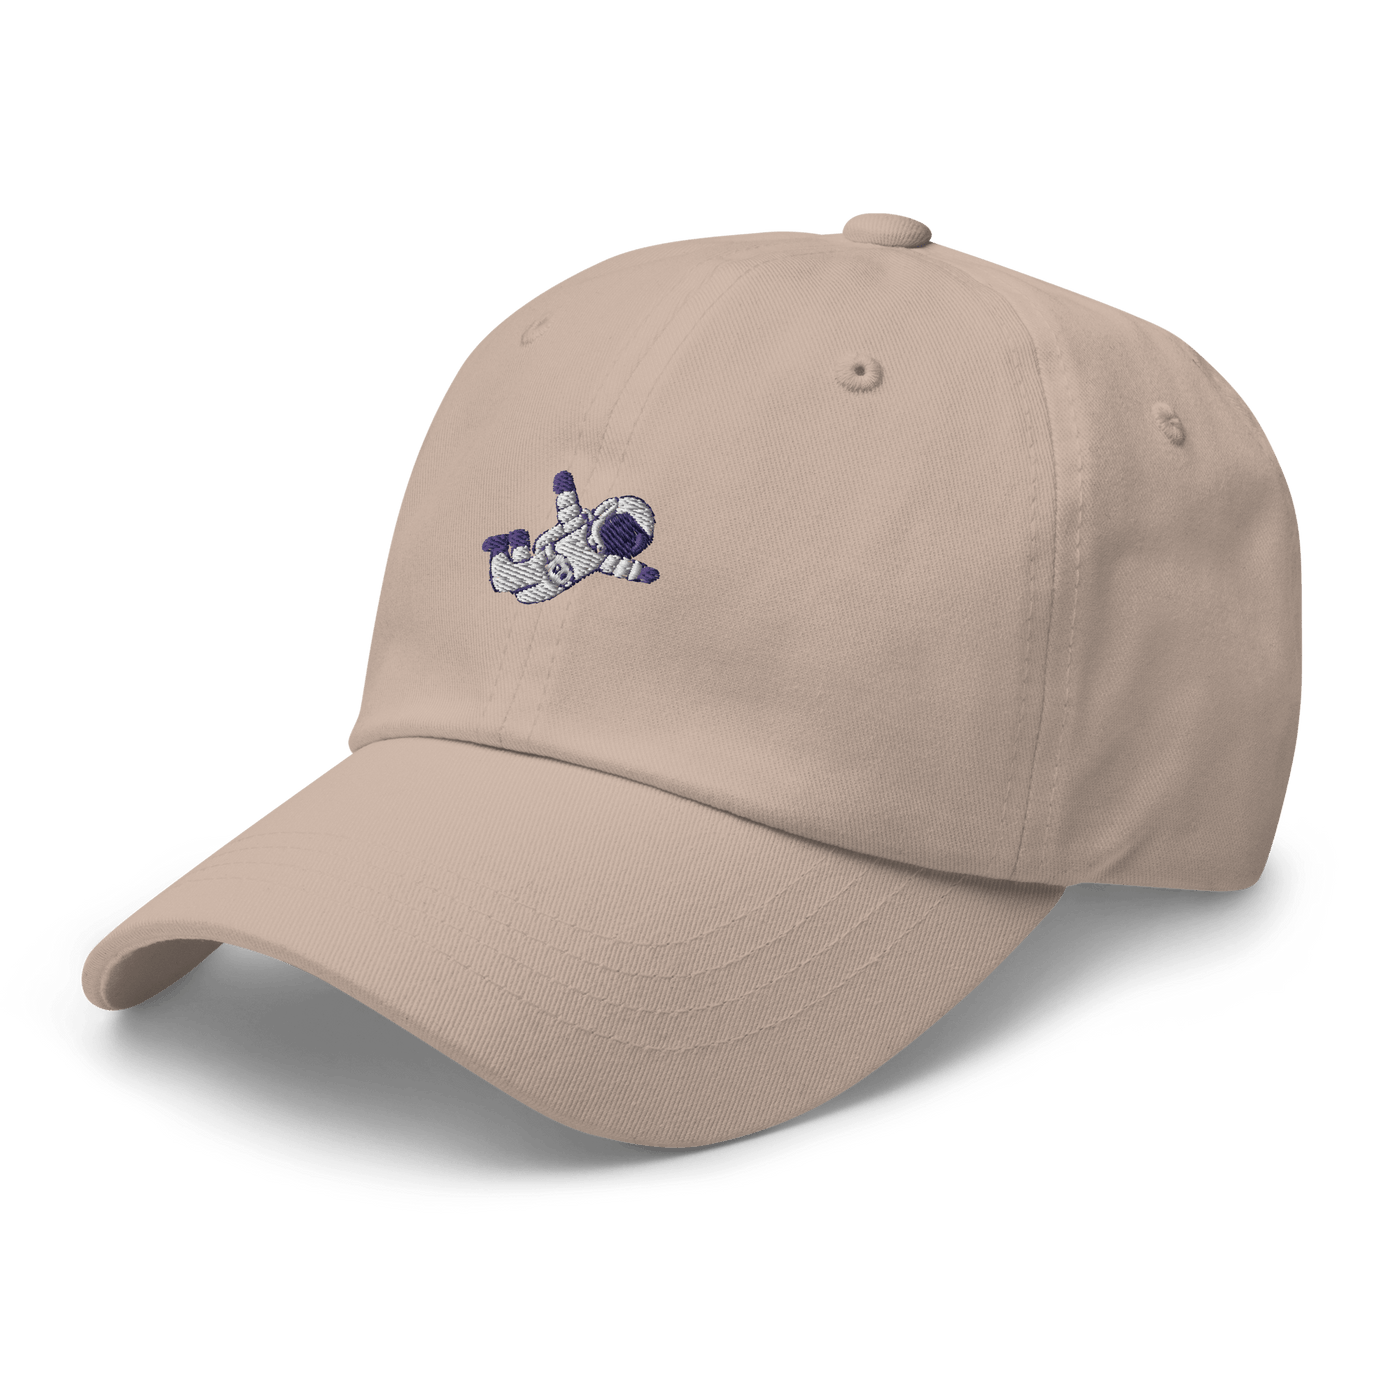 Astronaut Dad hat - Stone - - Just Another Cap Store